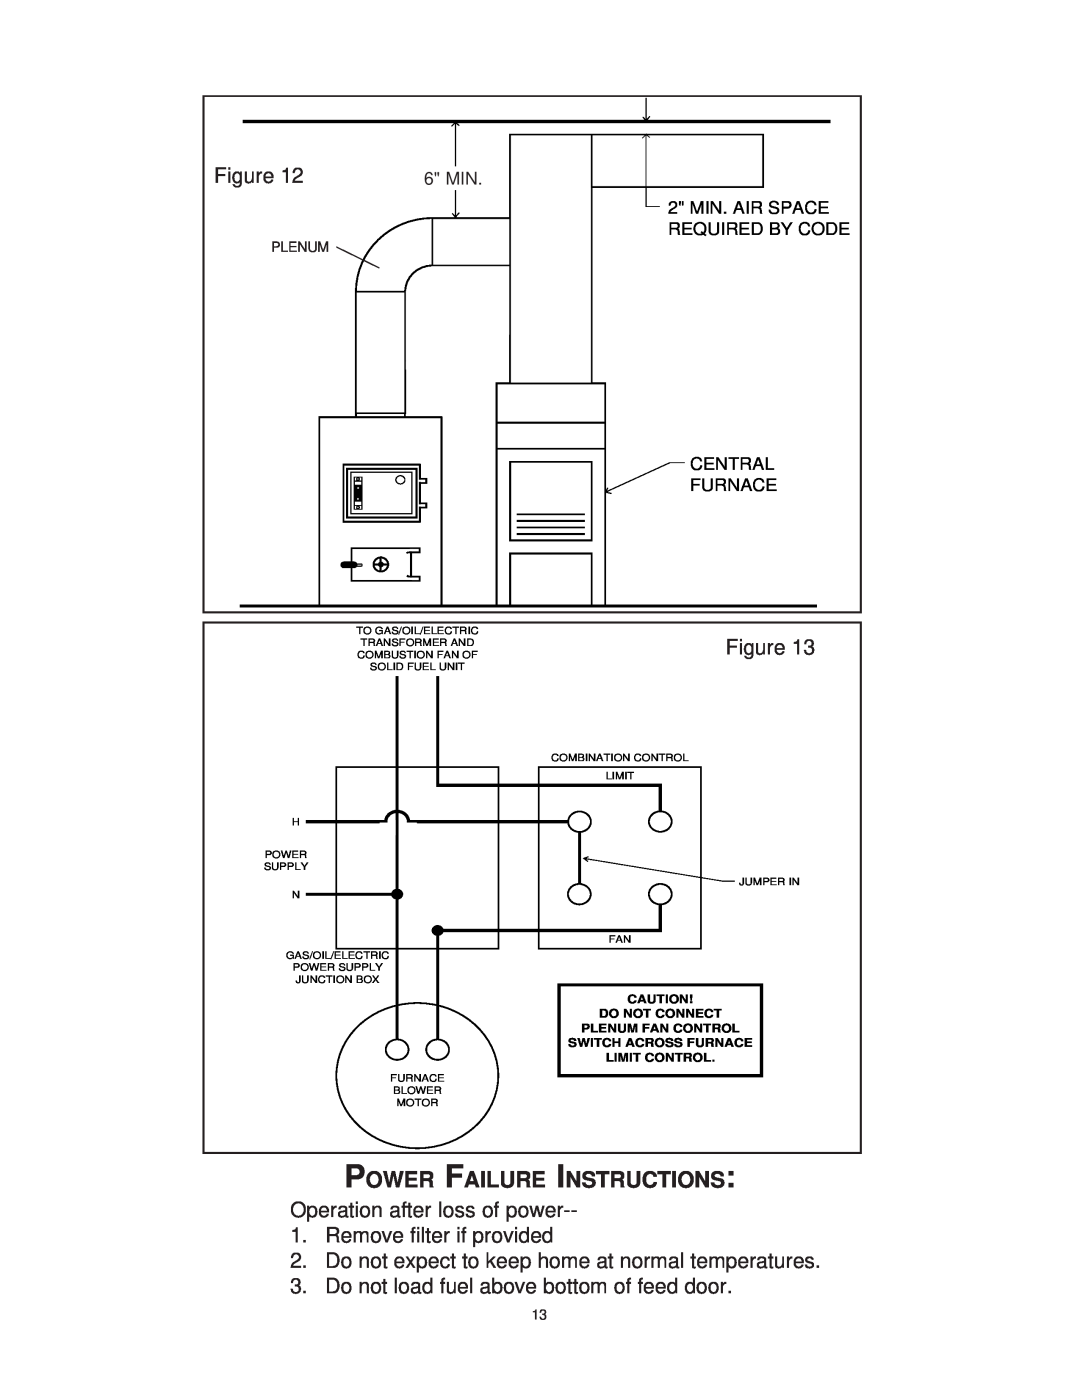 United States Stove 1537G Power Failure Instructions, 2 MIN. AIR SPACE, Required By Code, Central, Furnace, Plenum 